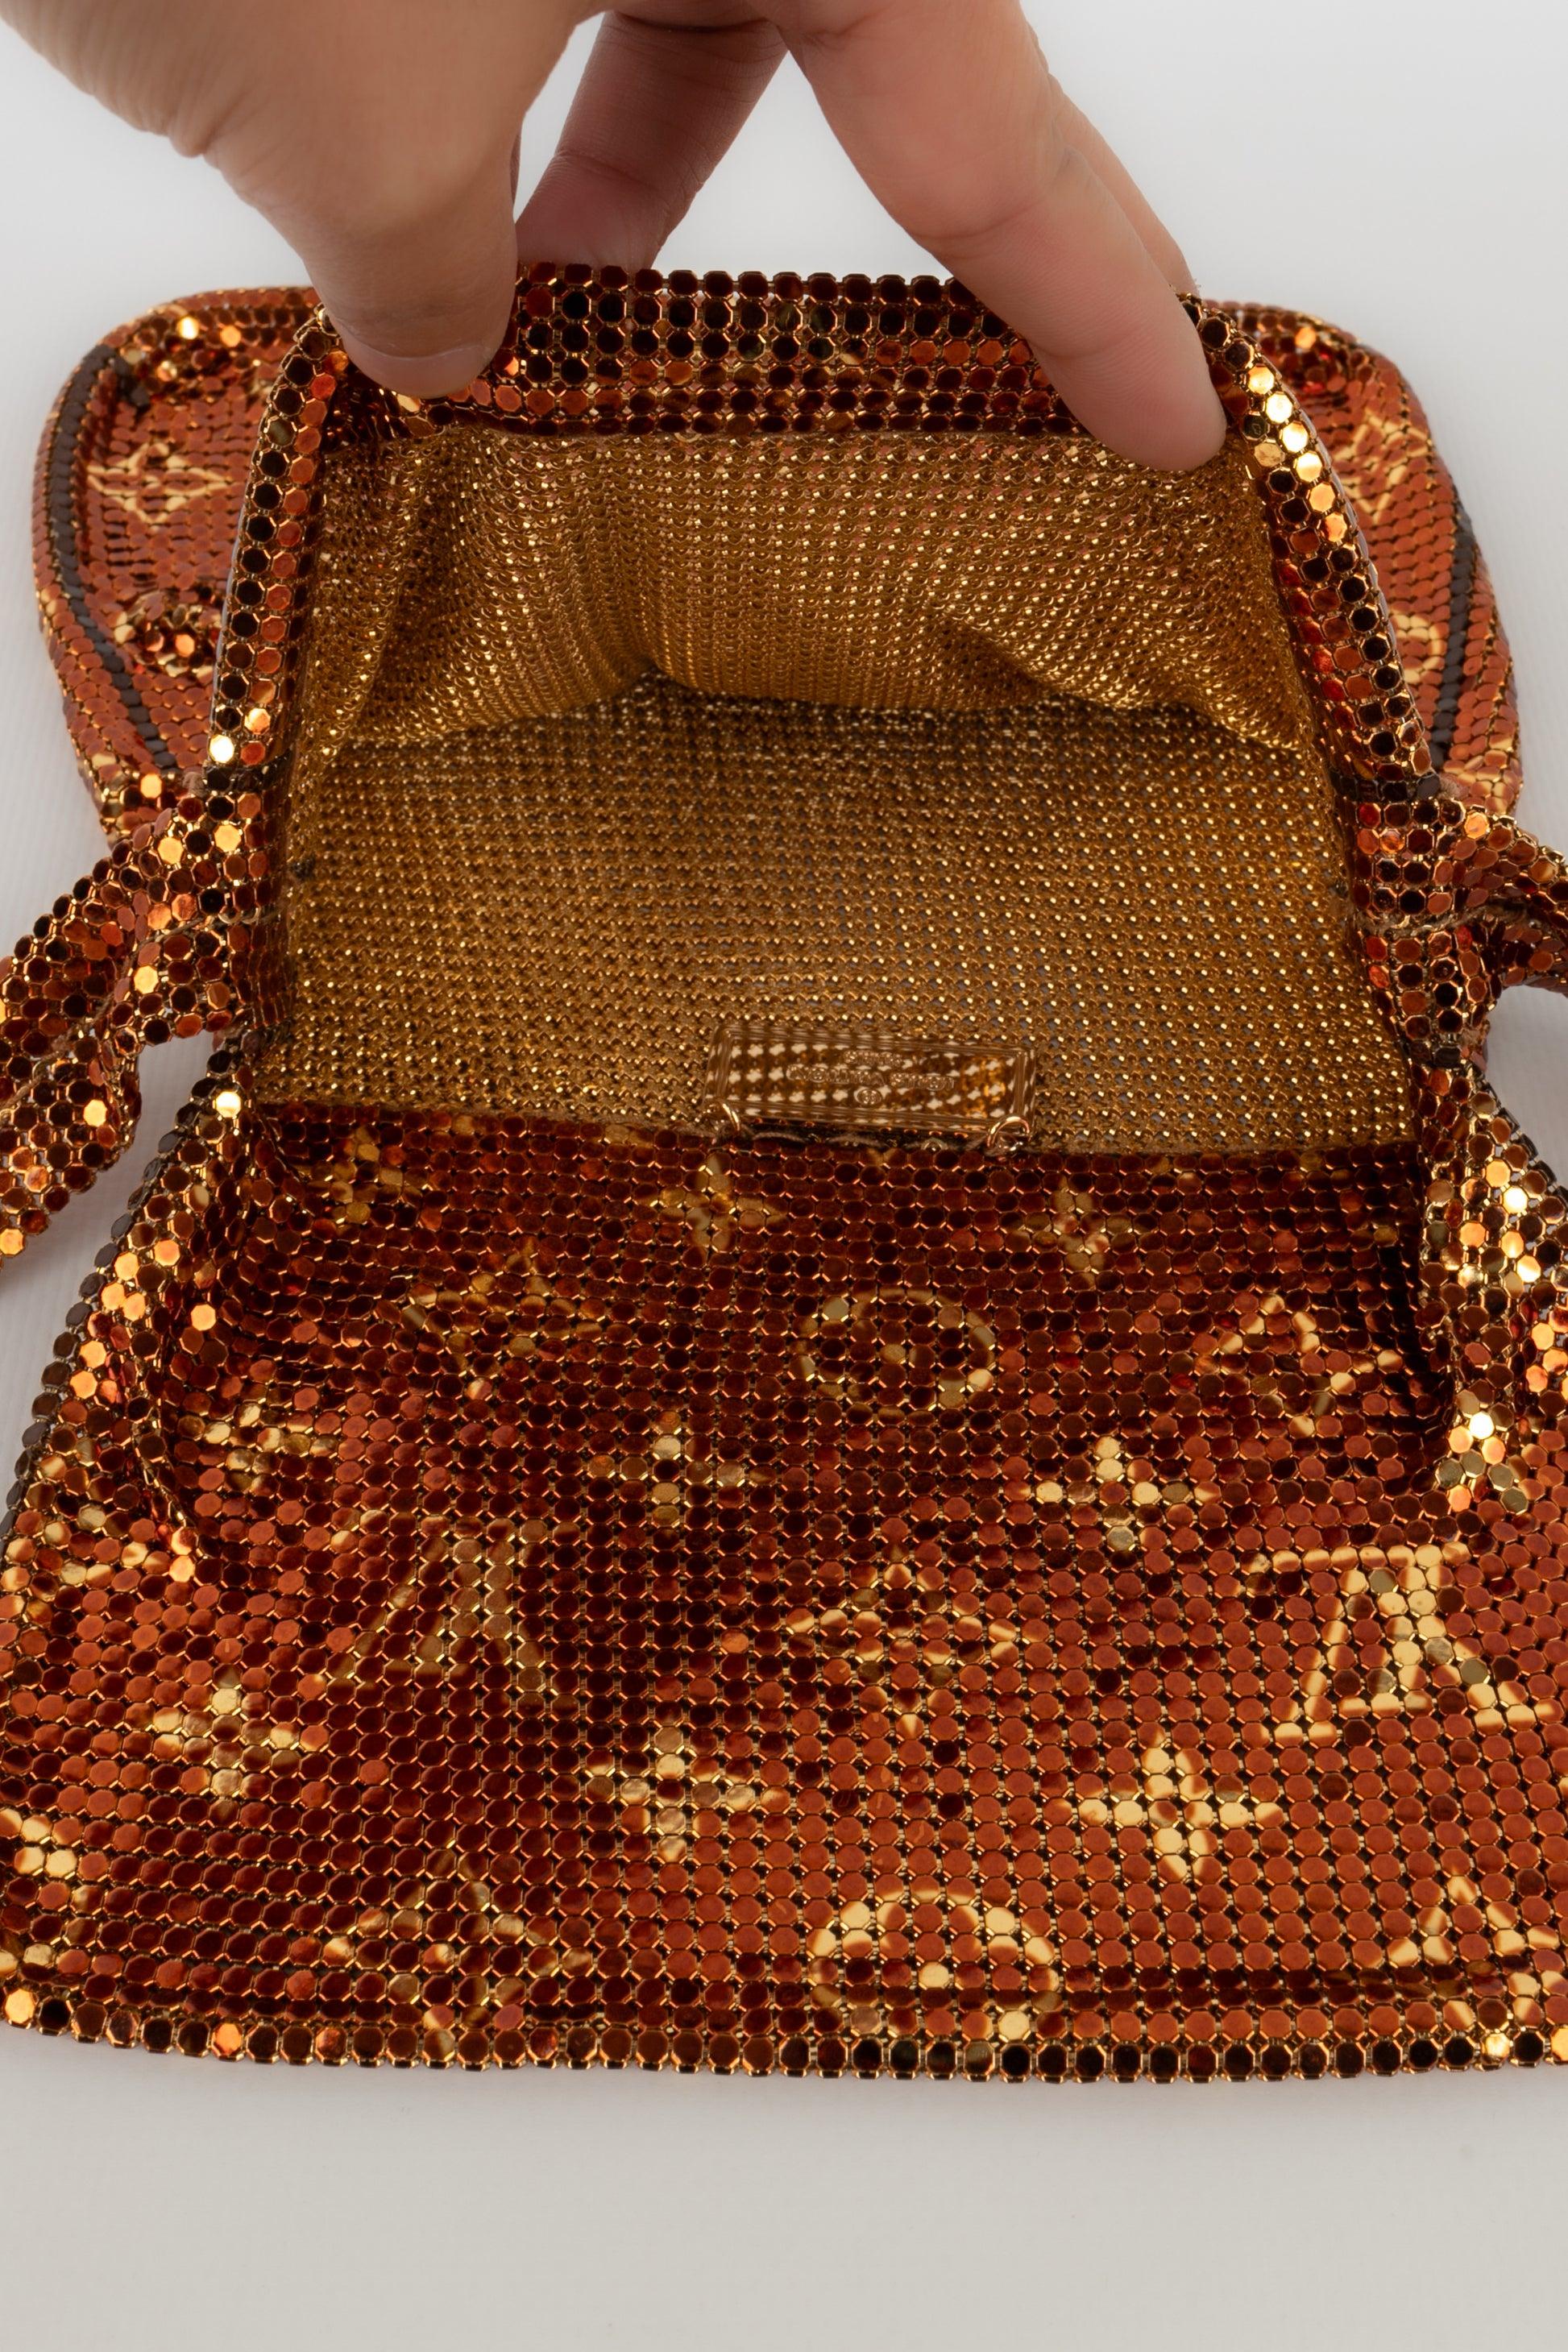 Louis Vuitton Small Bag in Copper and Gold Monogram Ribbed Knit, 2002 For Sale 1